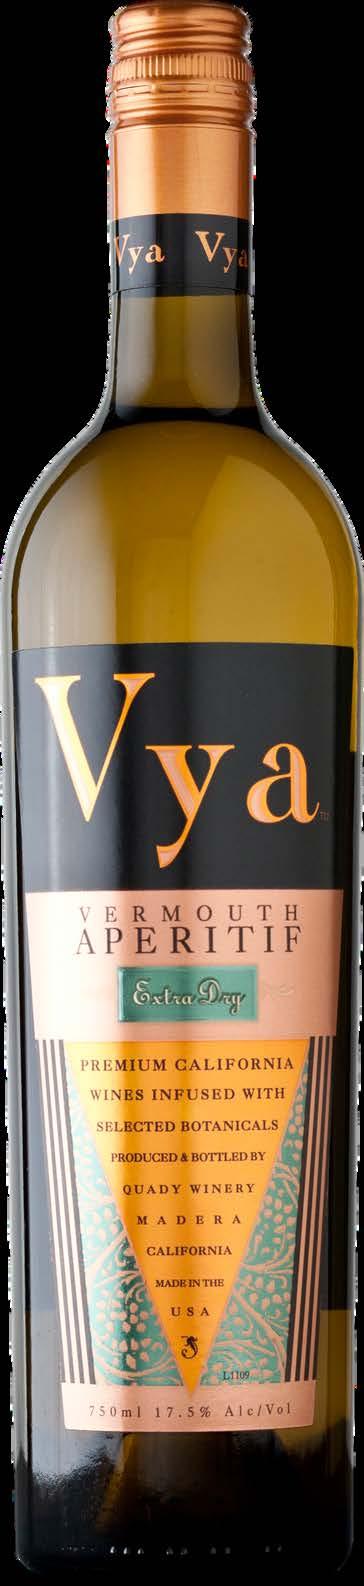 Best of the Year 2016 90 POINTS Vya Vermouth Extra Dry "Made with a California wine base, this pale strawcolored vermouth has a ripe tropical fruit nose